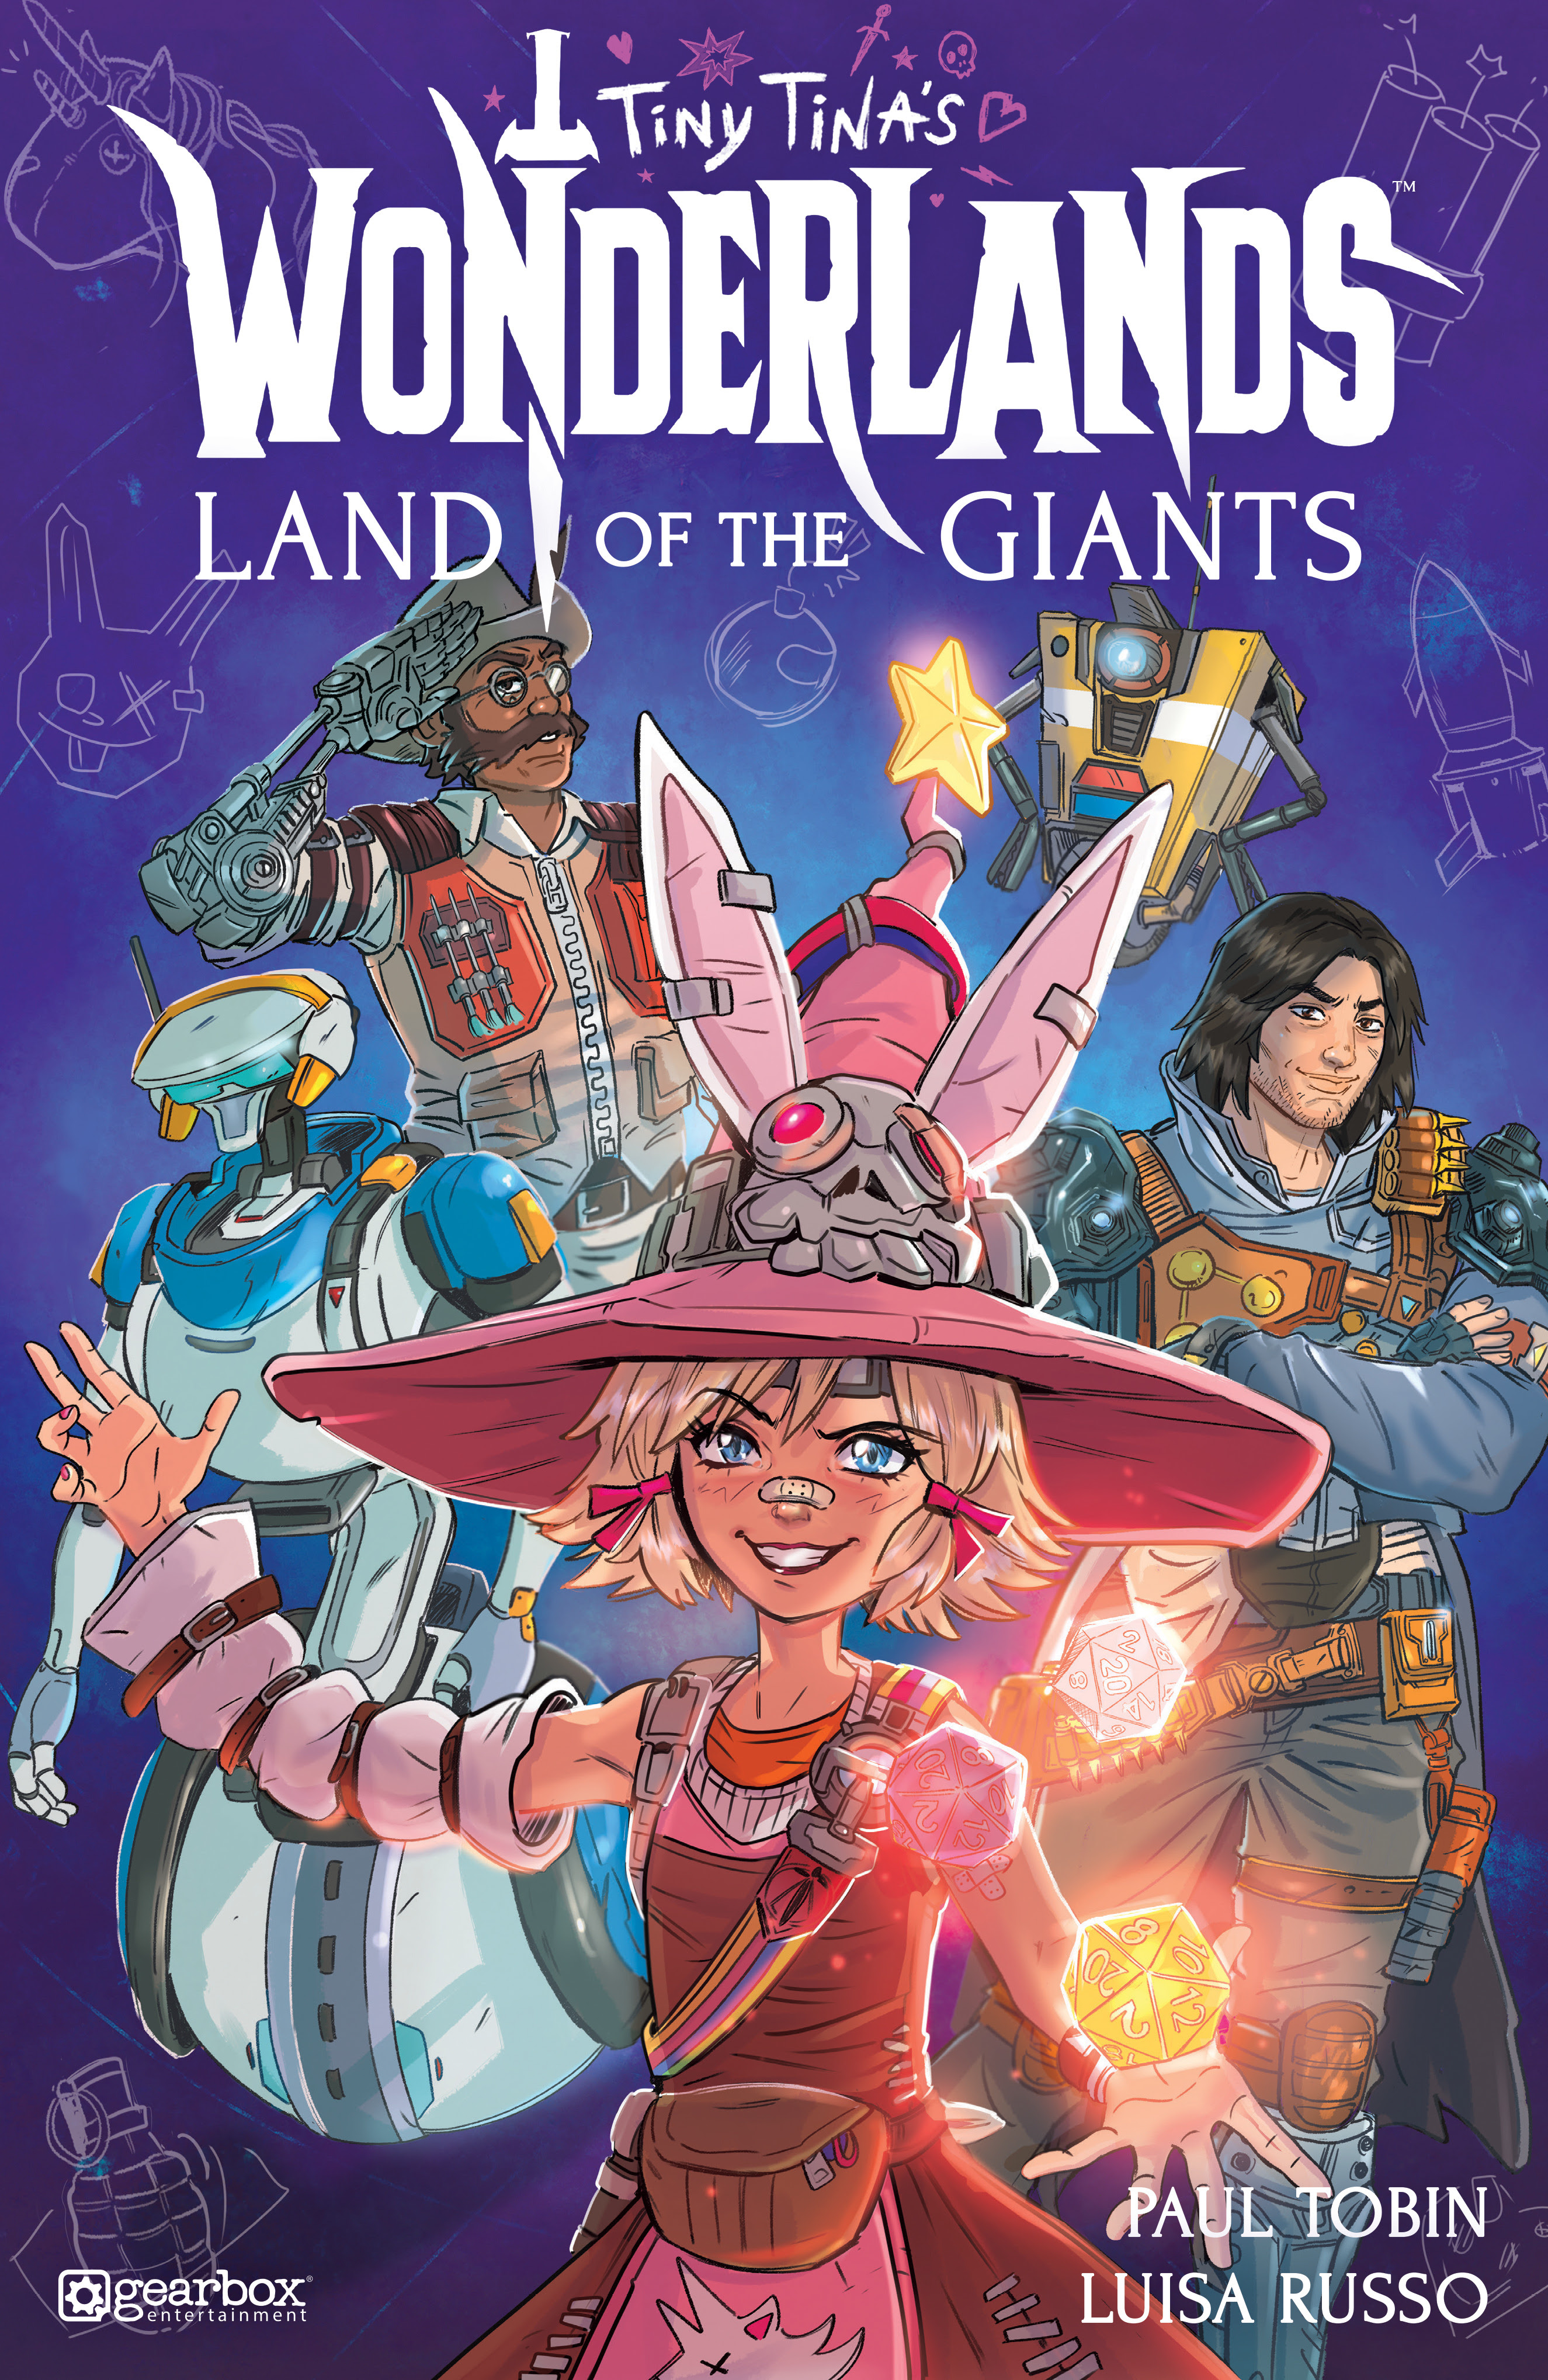 Tiny Tina's Wonderlands: Land of the Giants - Note: Cover Artwork Not Final